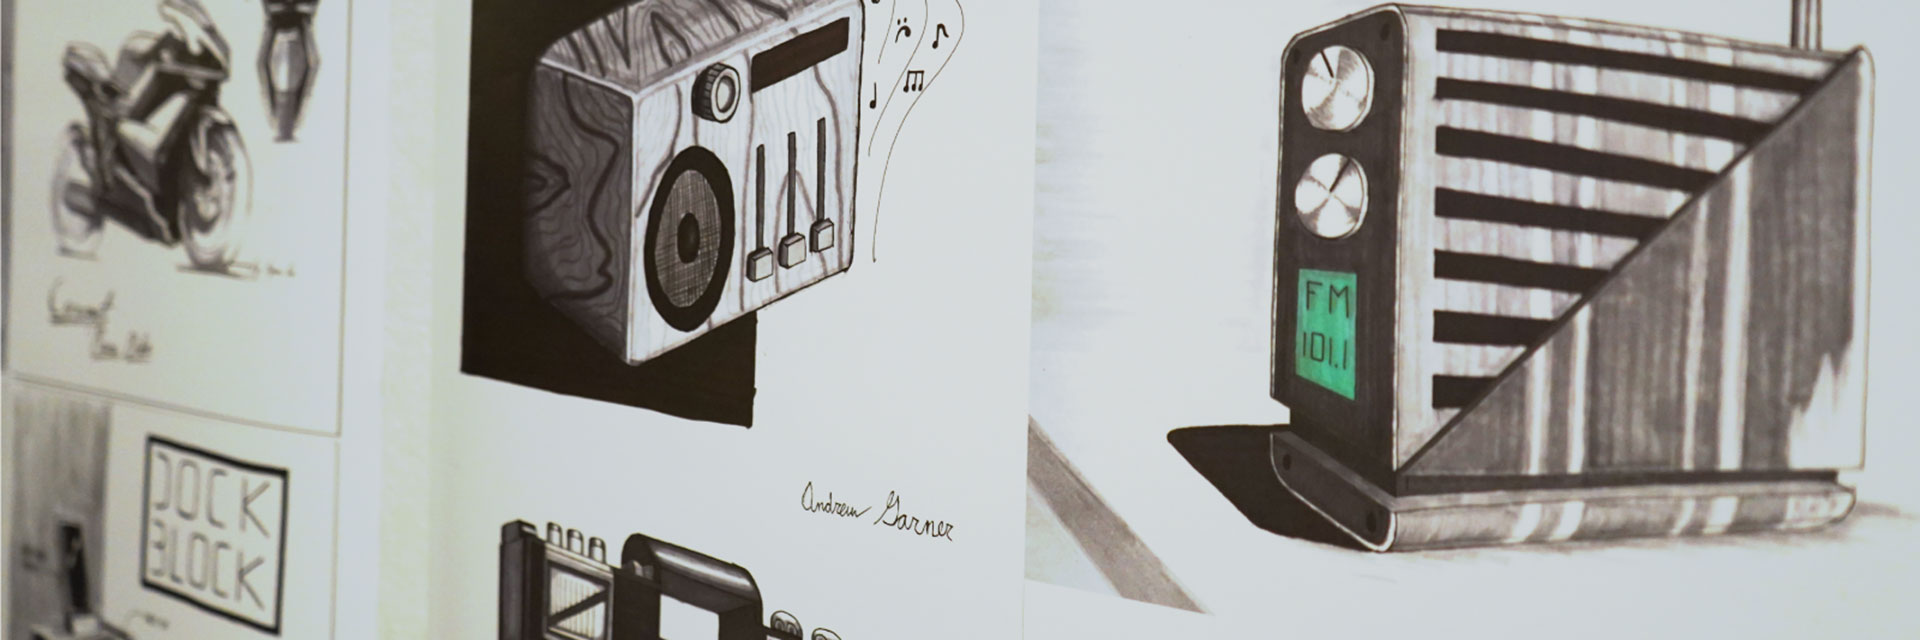 Student sketches of portable radios.